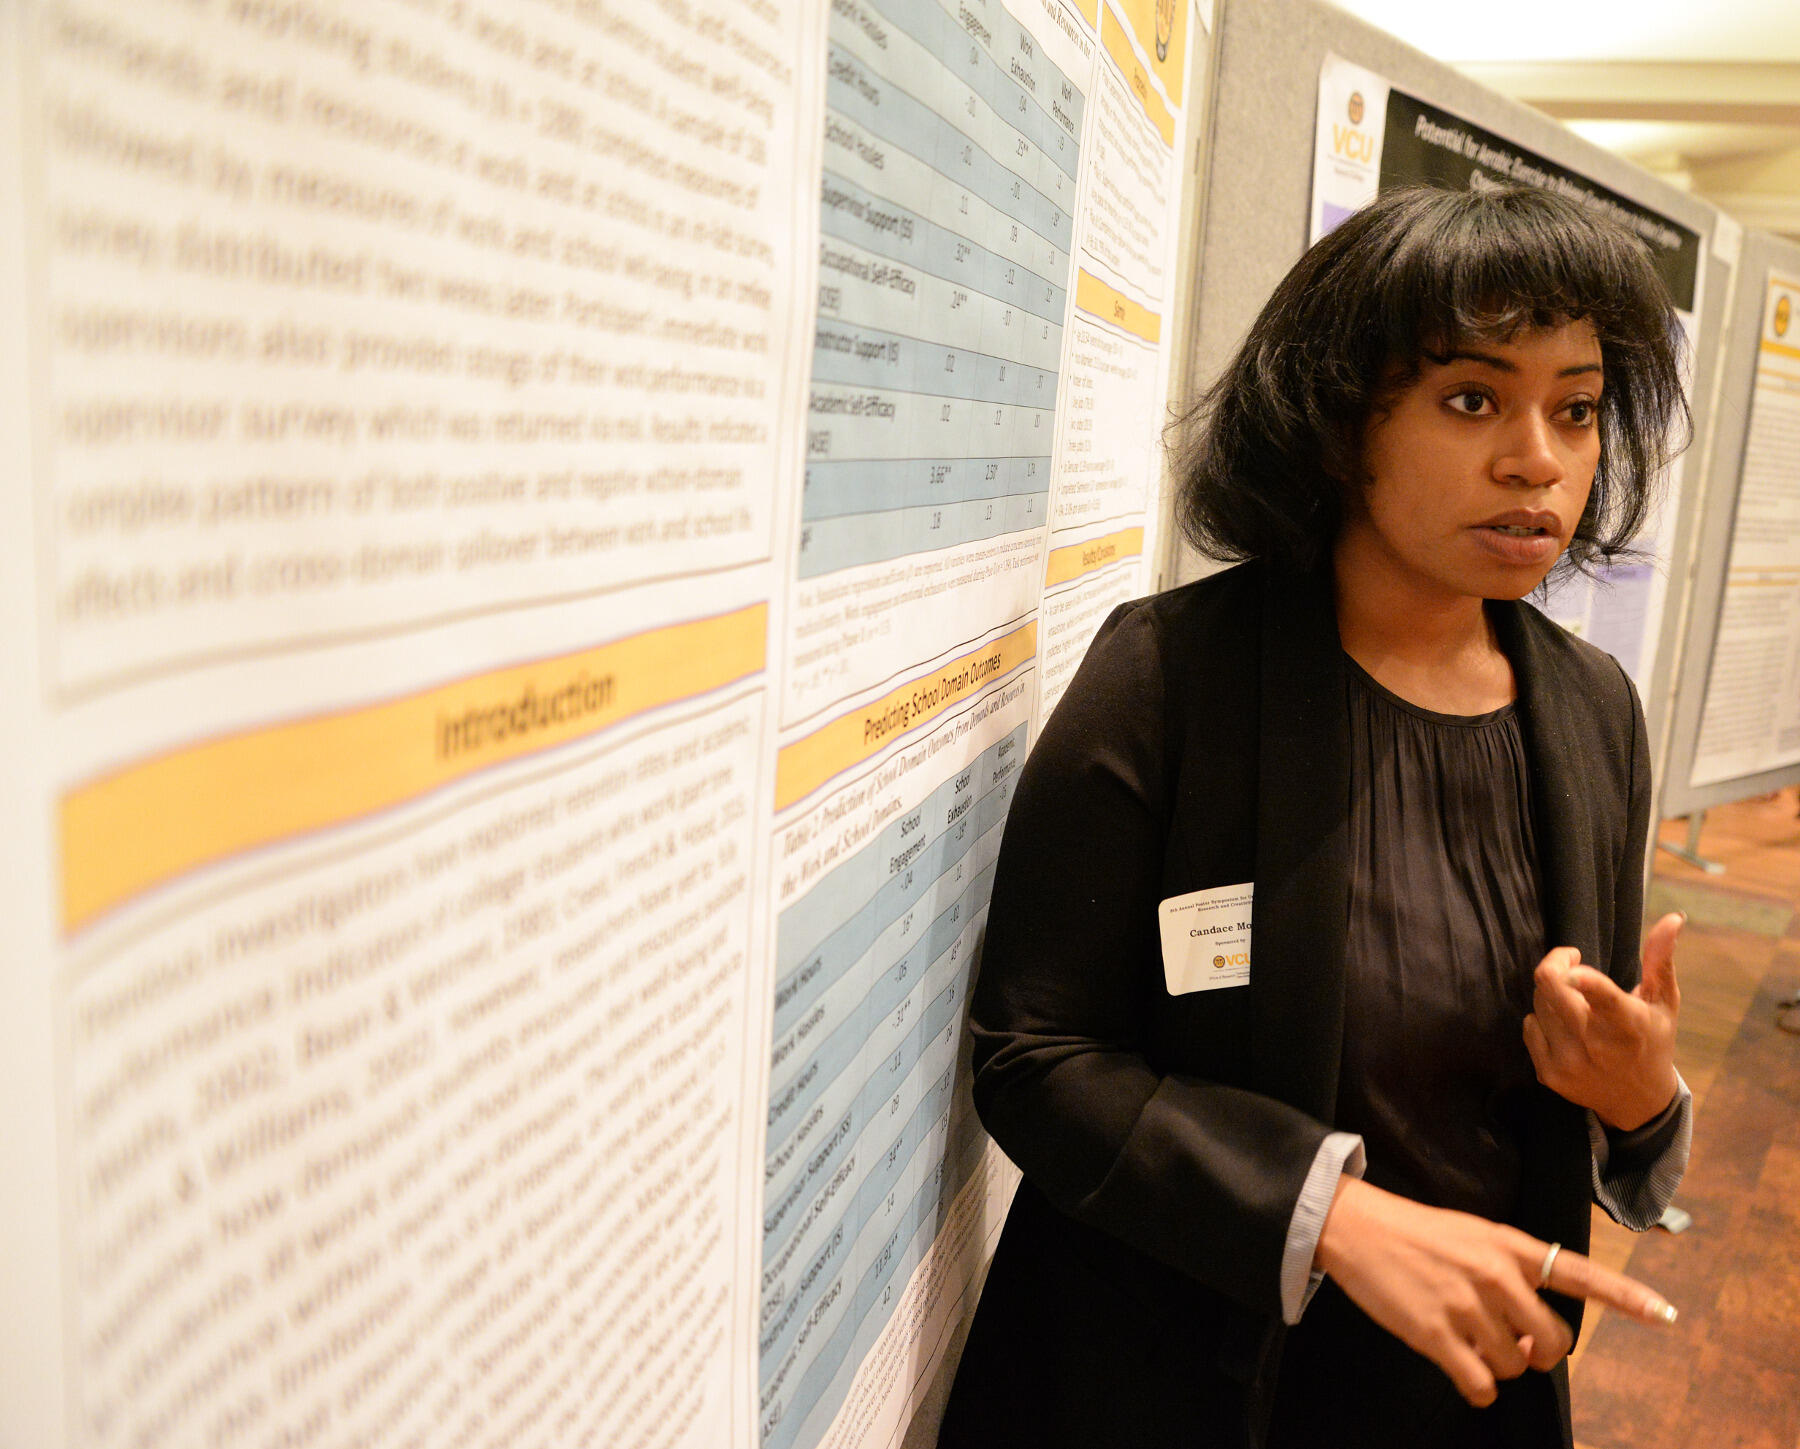 Candace Moore discusses her research on the impact of student employment during the 10th Annual Poster Symposium for Undergraduate Research and Creativity, held Wednesday, April 20 at the University Student Commons.